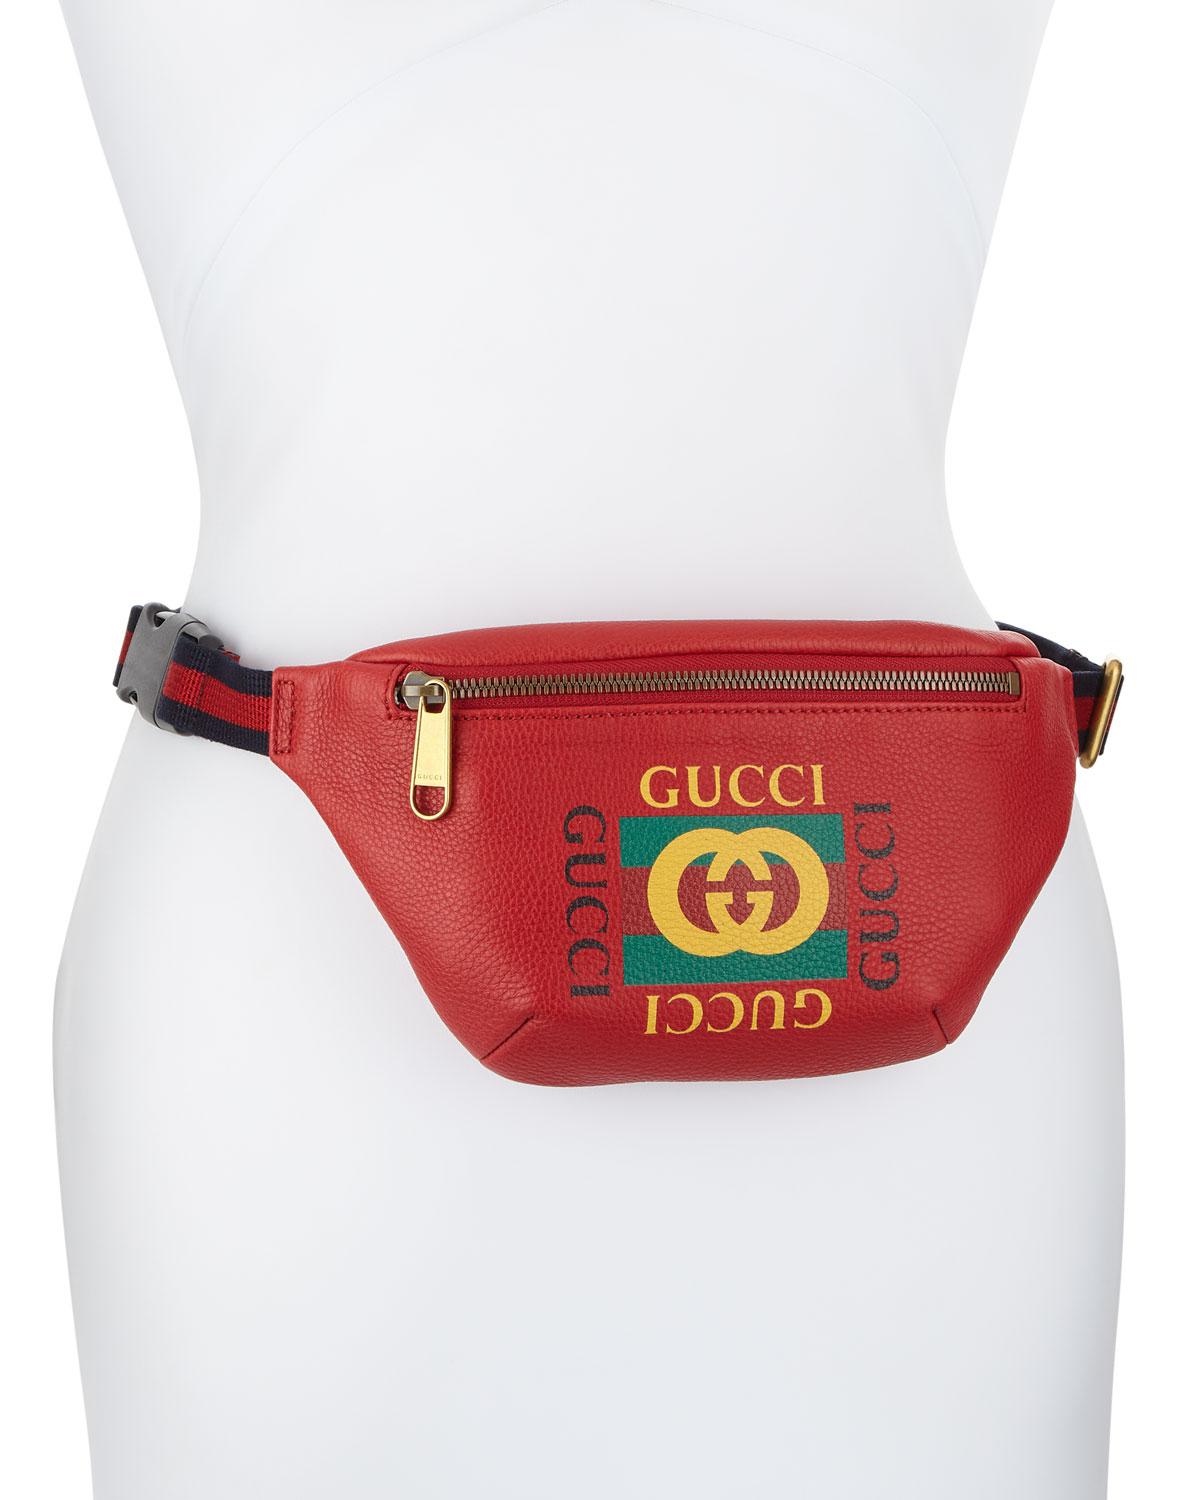 Lyst - Gucci Men&#39;s Small Retro Leather Fanny Pack Belt Bag in Red